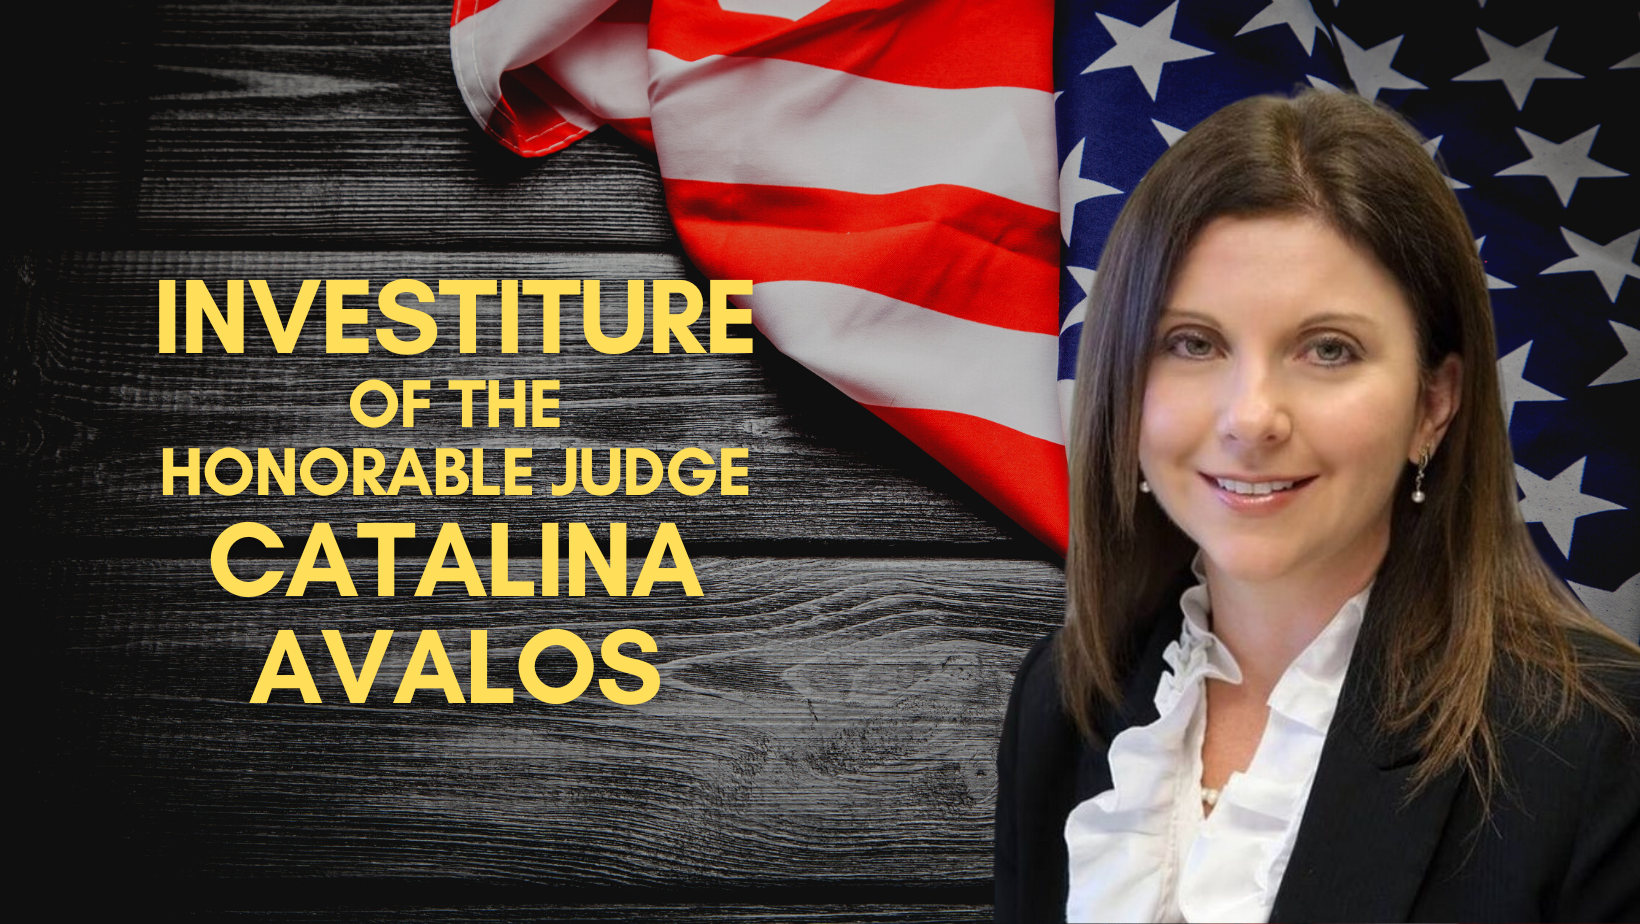 Investiture of the Honorable Judge Catalina Avalos